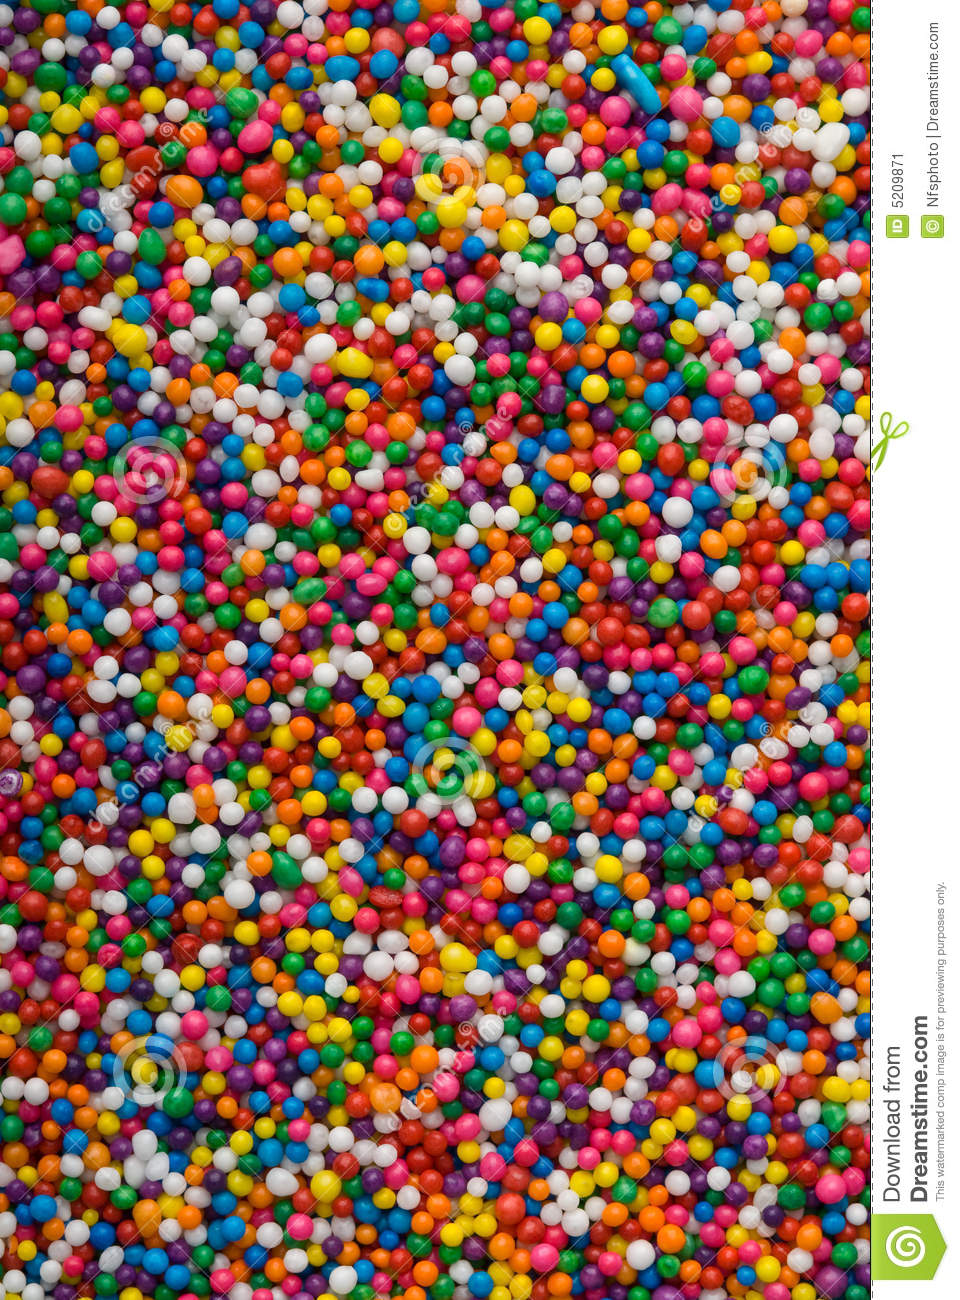 Colorful Sprinkles Jimmies For Cake Decoration Stock Image   Image